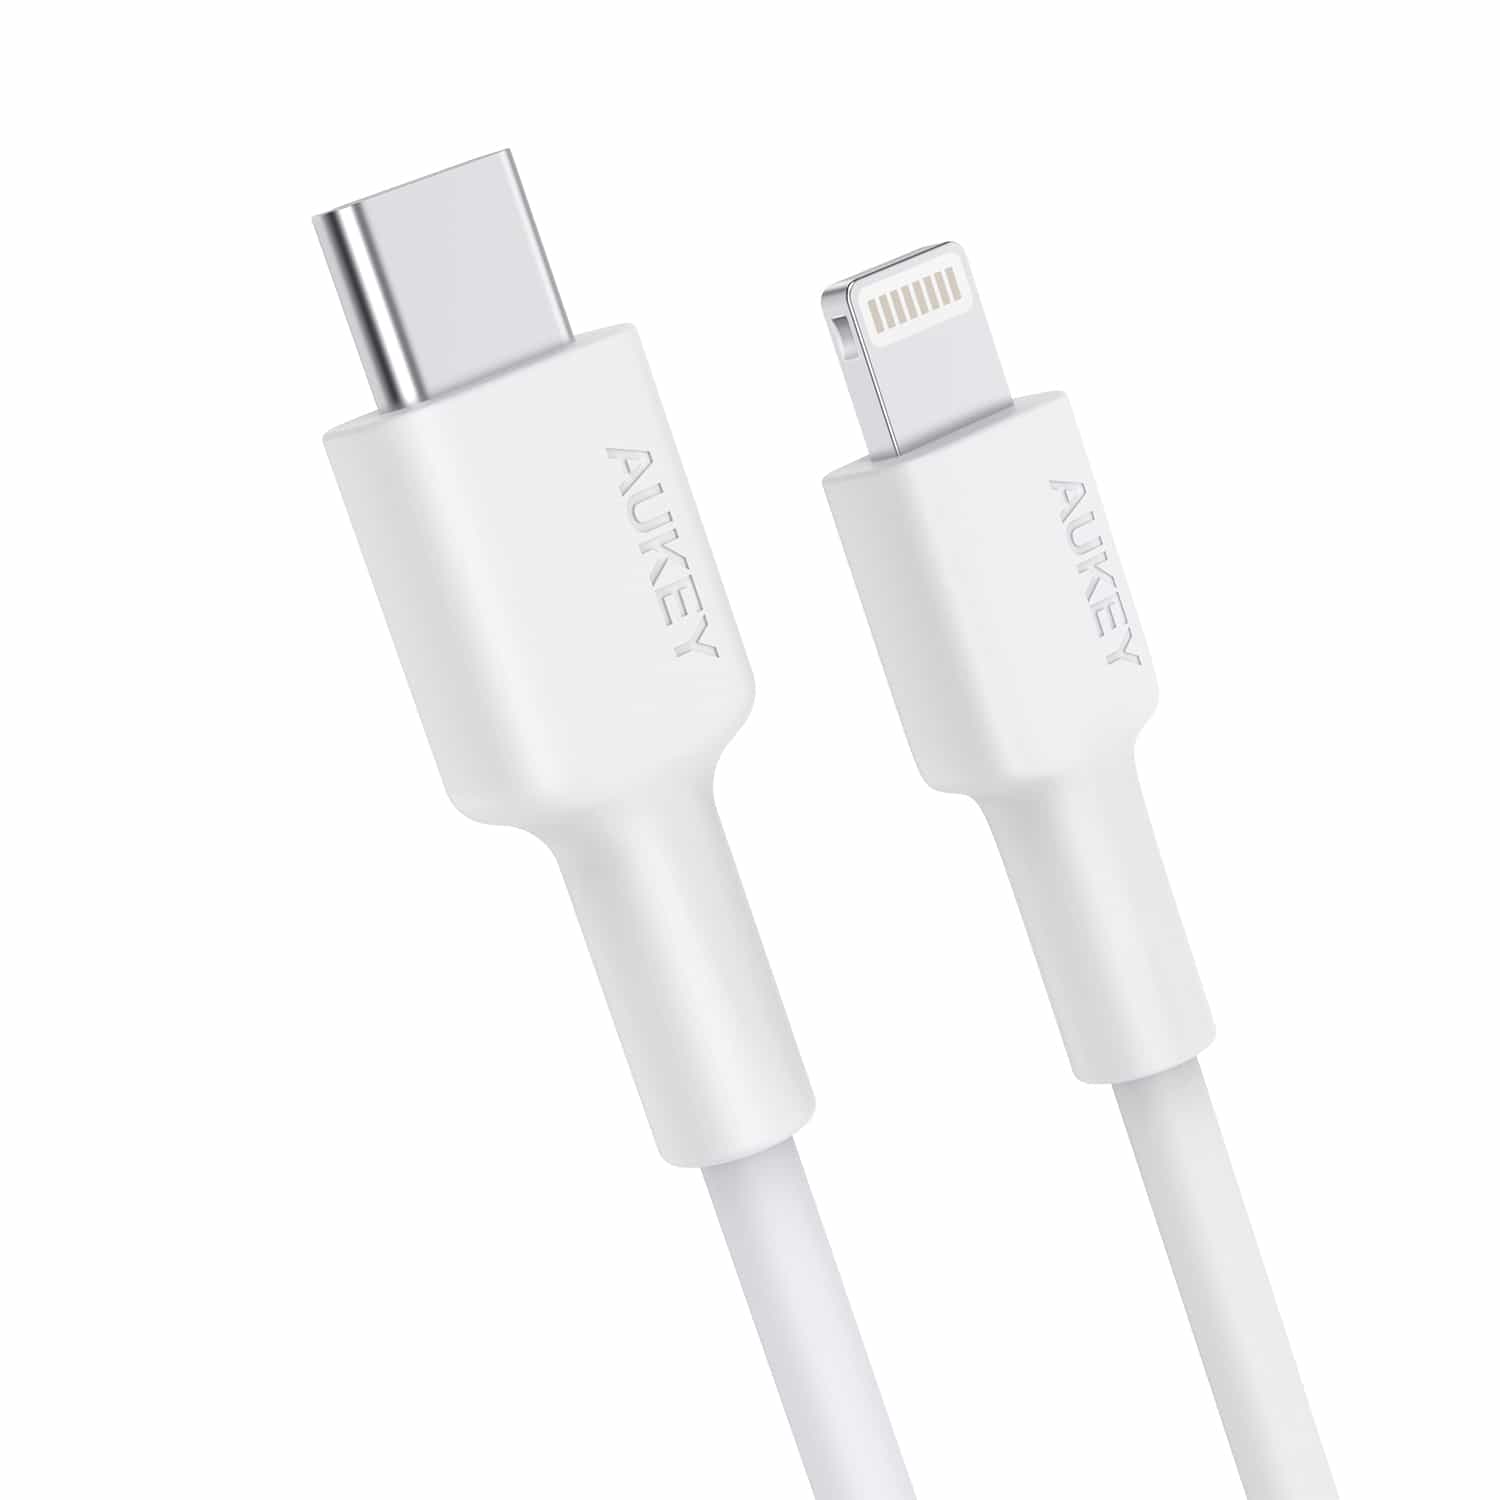 CB-CL01 USB C To Lightning Cable